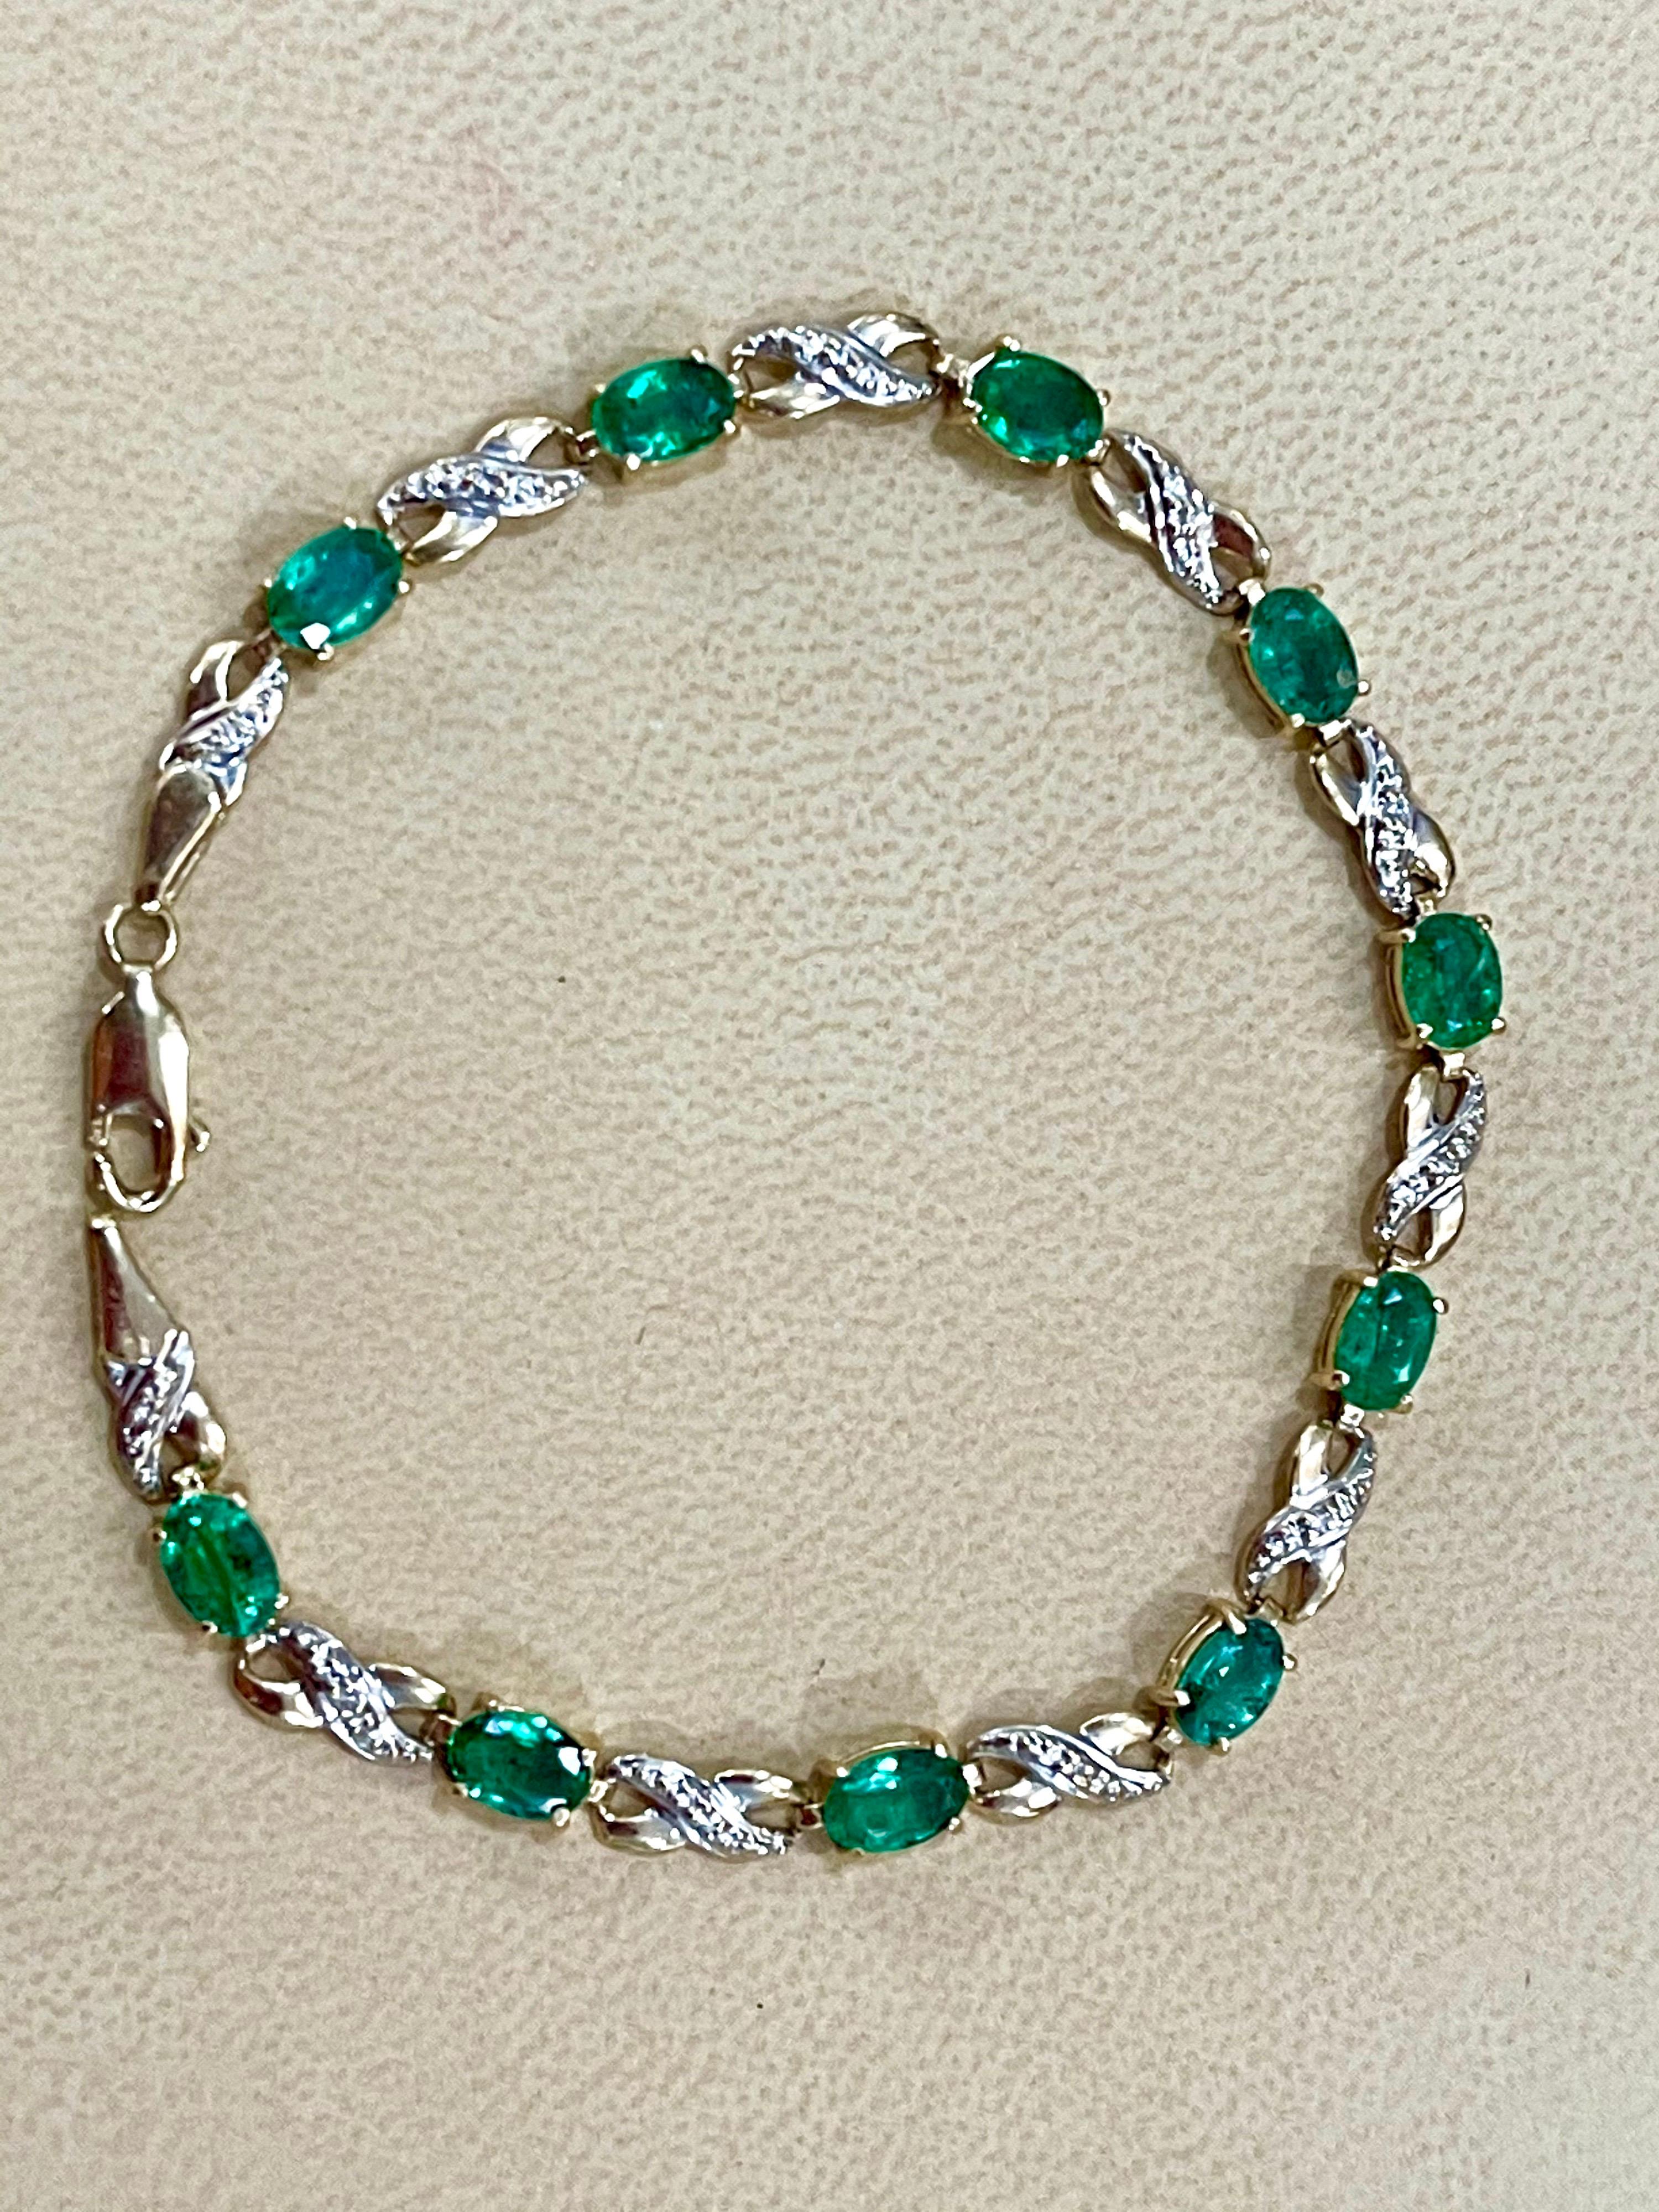  Approximately 2.5  Carat Natural Emerald Tennis Bracelet 14 Karat Yellow Gold with Diamond Accent
This exceptionally affordable Tennis  bracelet has 10 stones of oval shape natural emeralds
Emeralds are Brazilian quality is good
This is a clearance